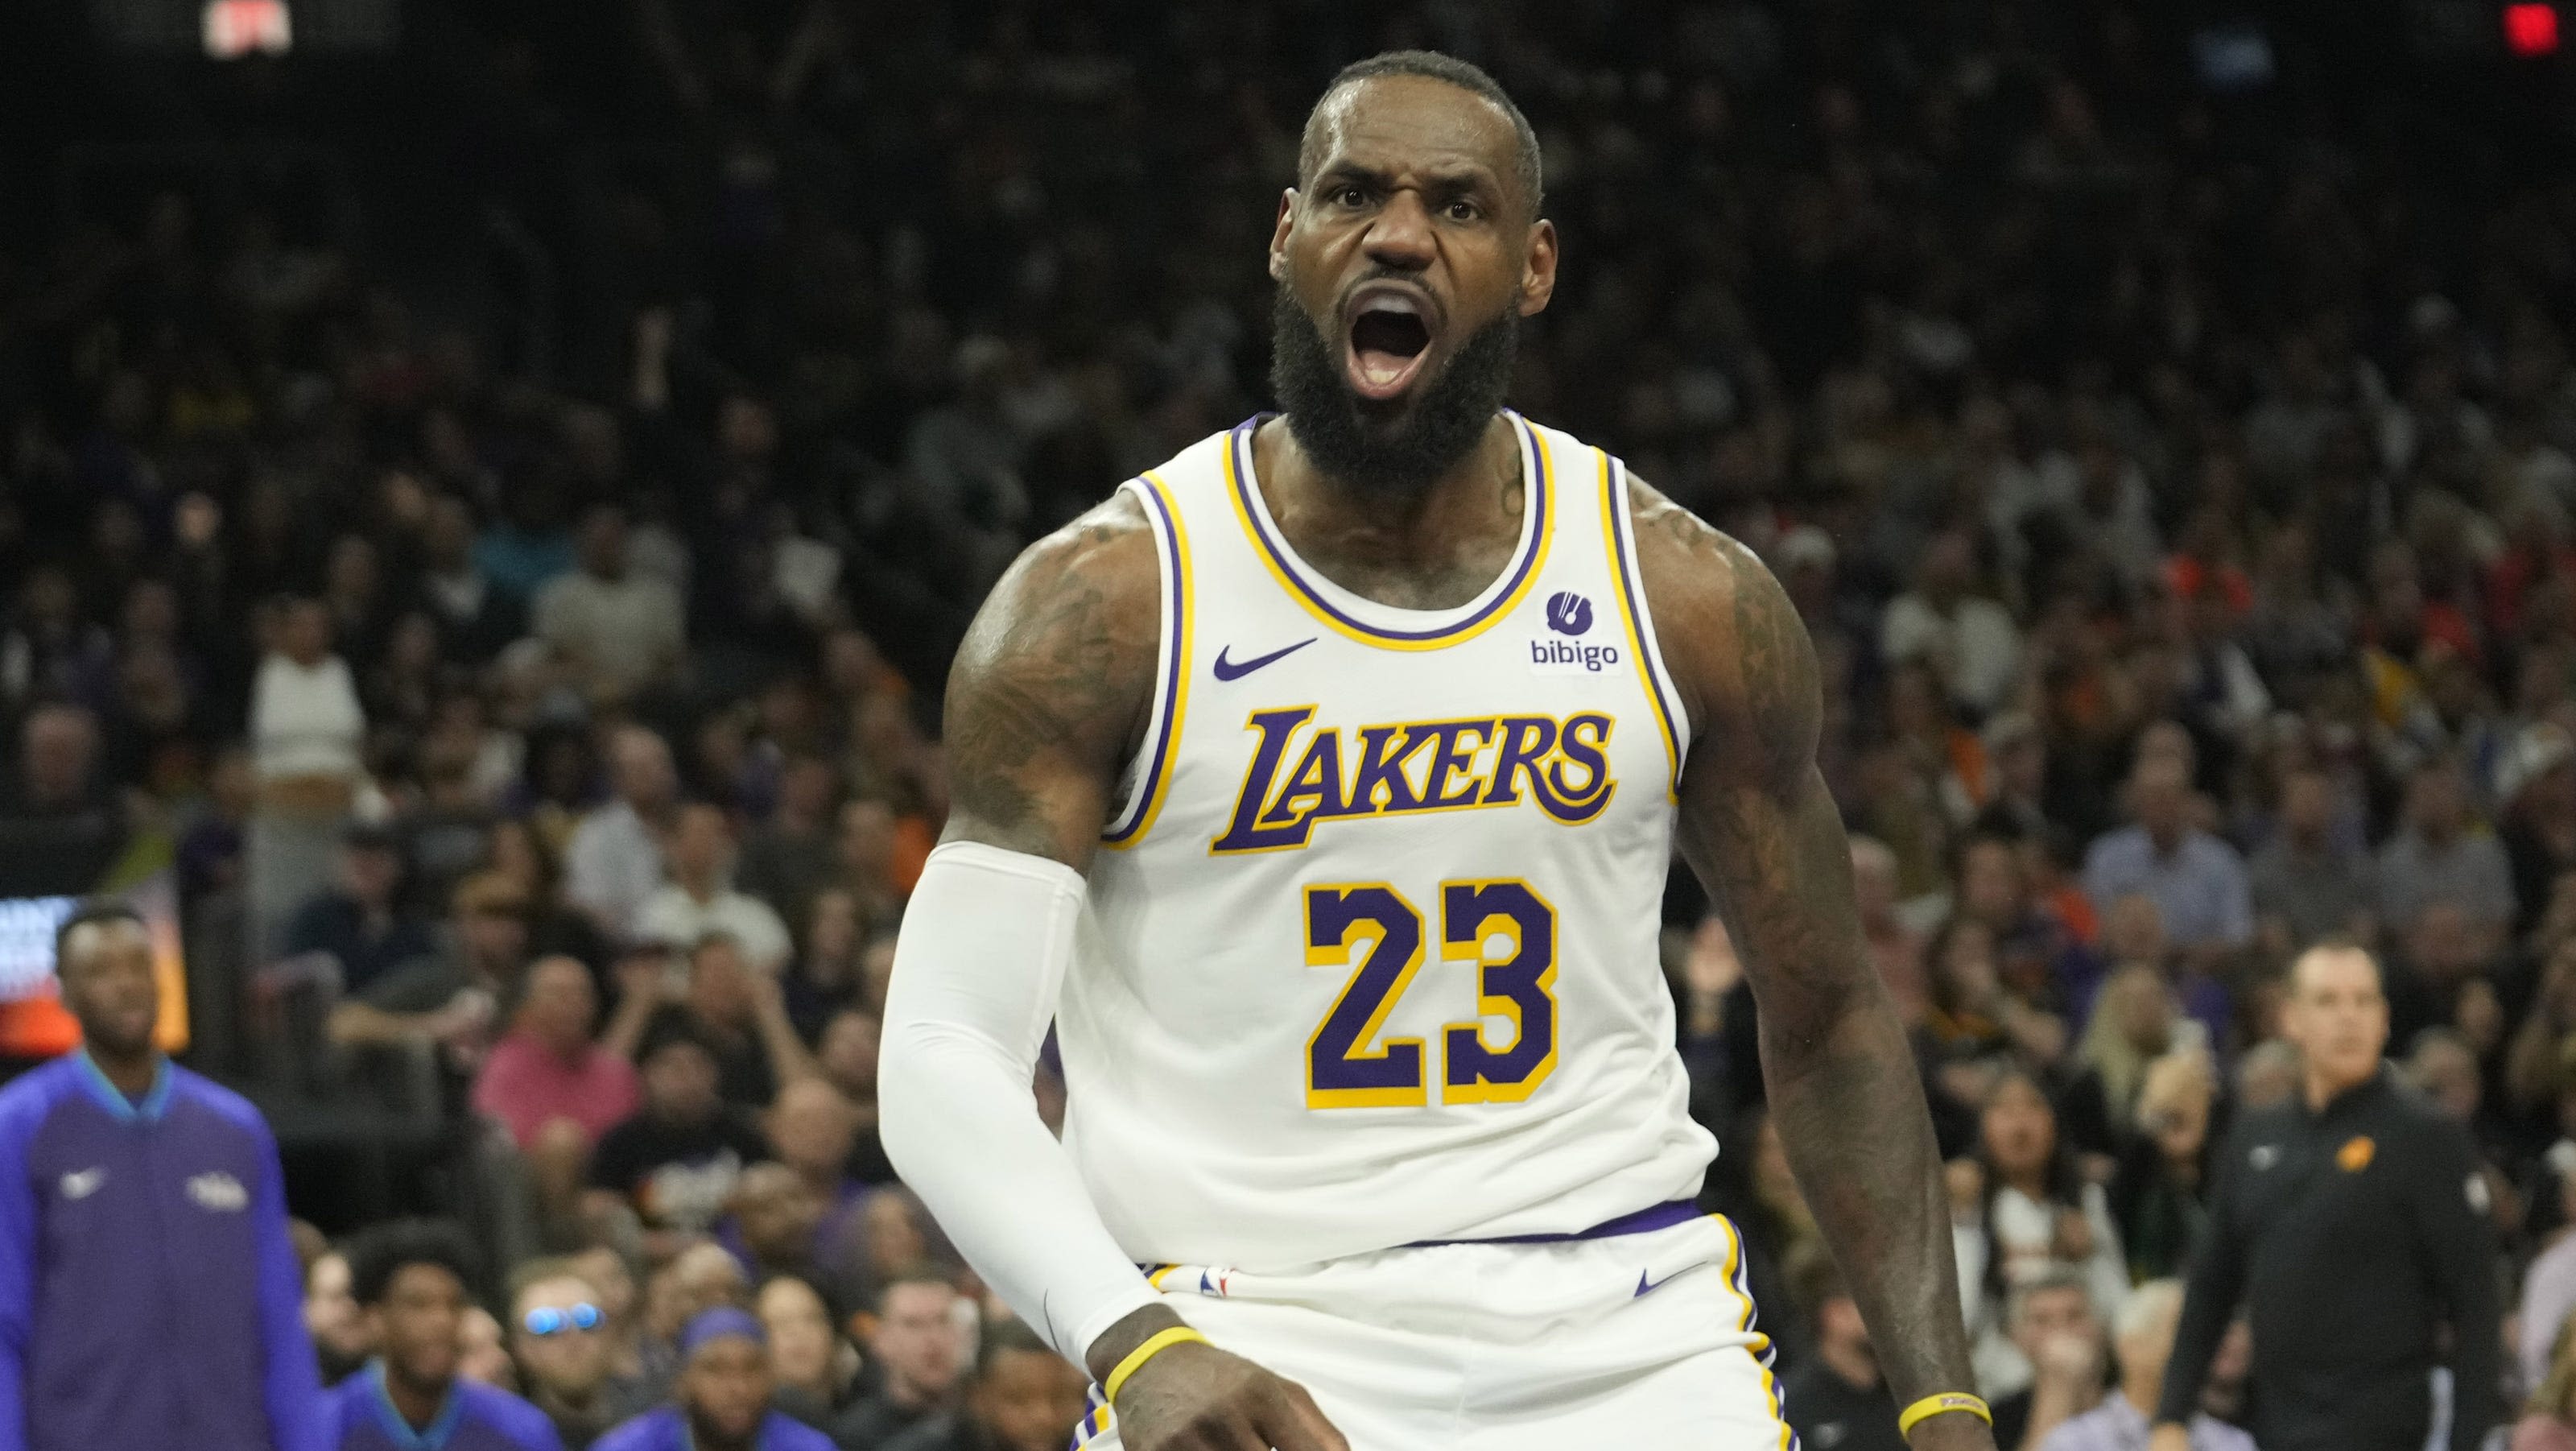 LeBron James next team odds: Cleveland Cavaliers, Phoenix Suns favored if he leaves Lakers